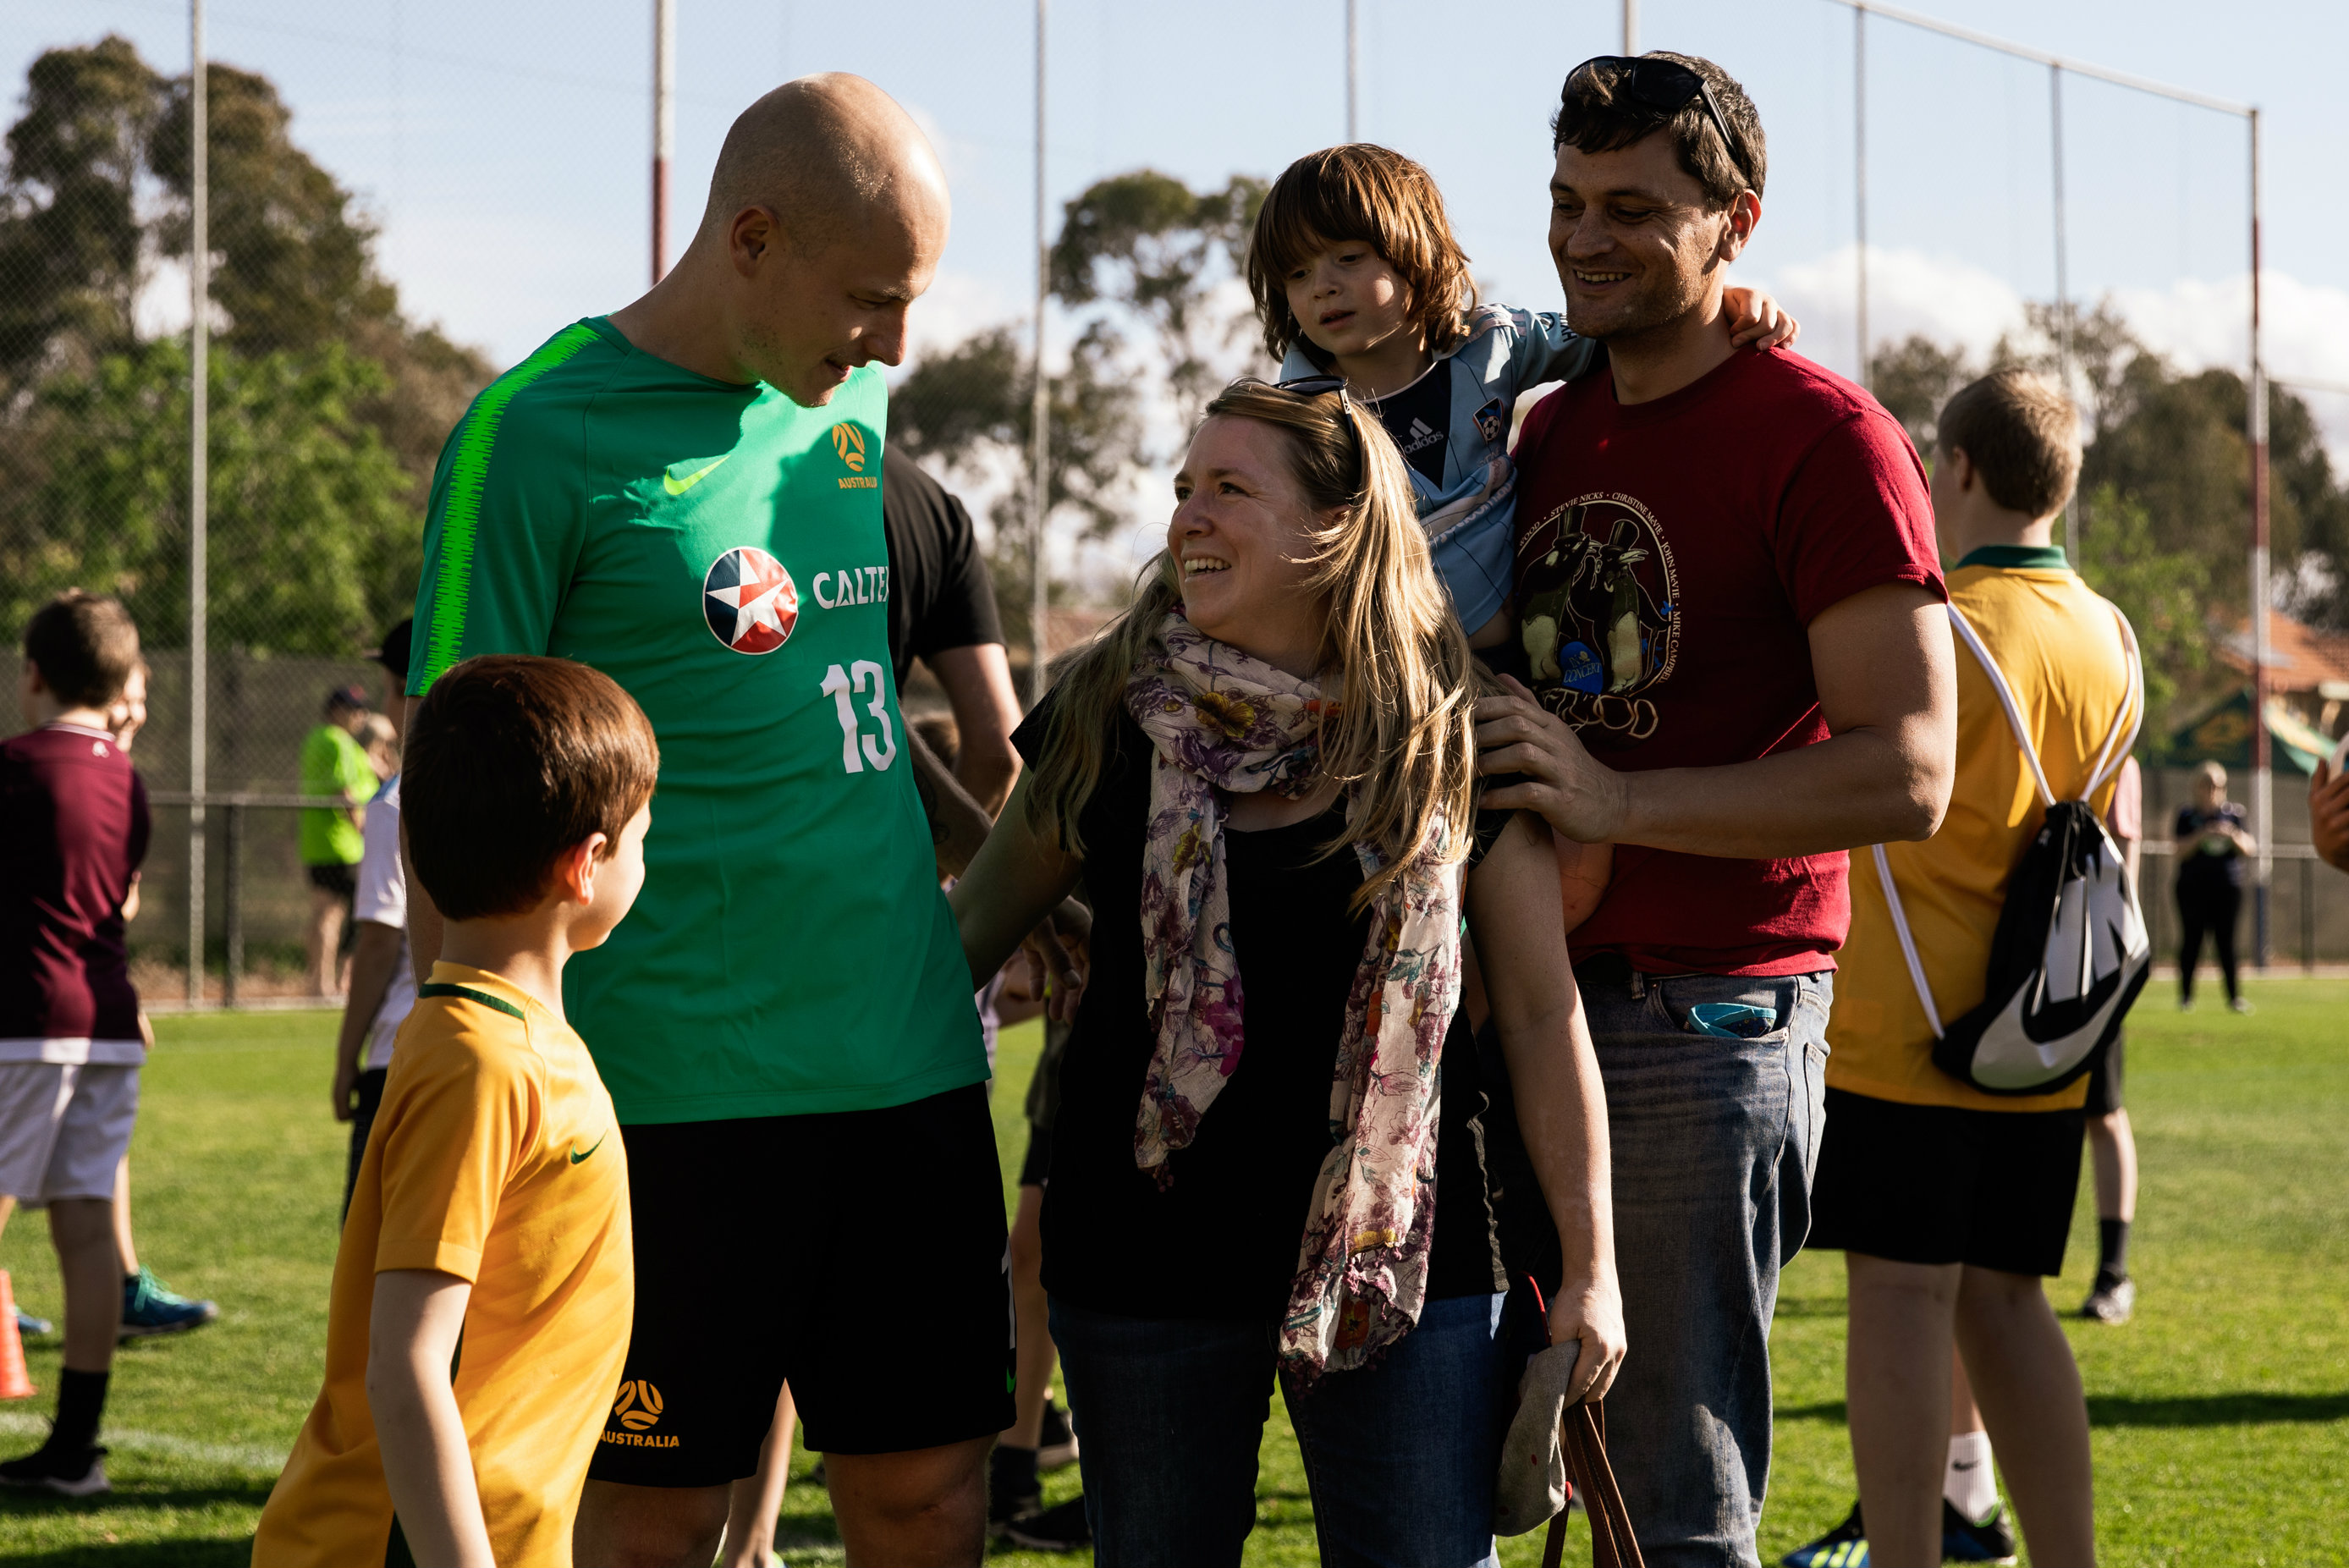 Caltex Socceroos training and fan day